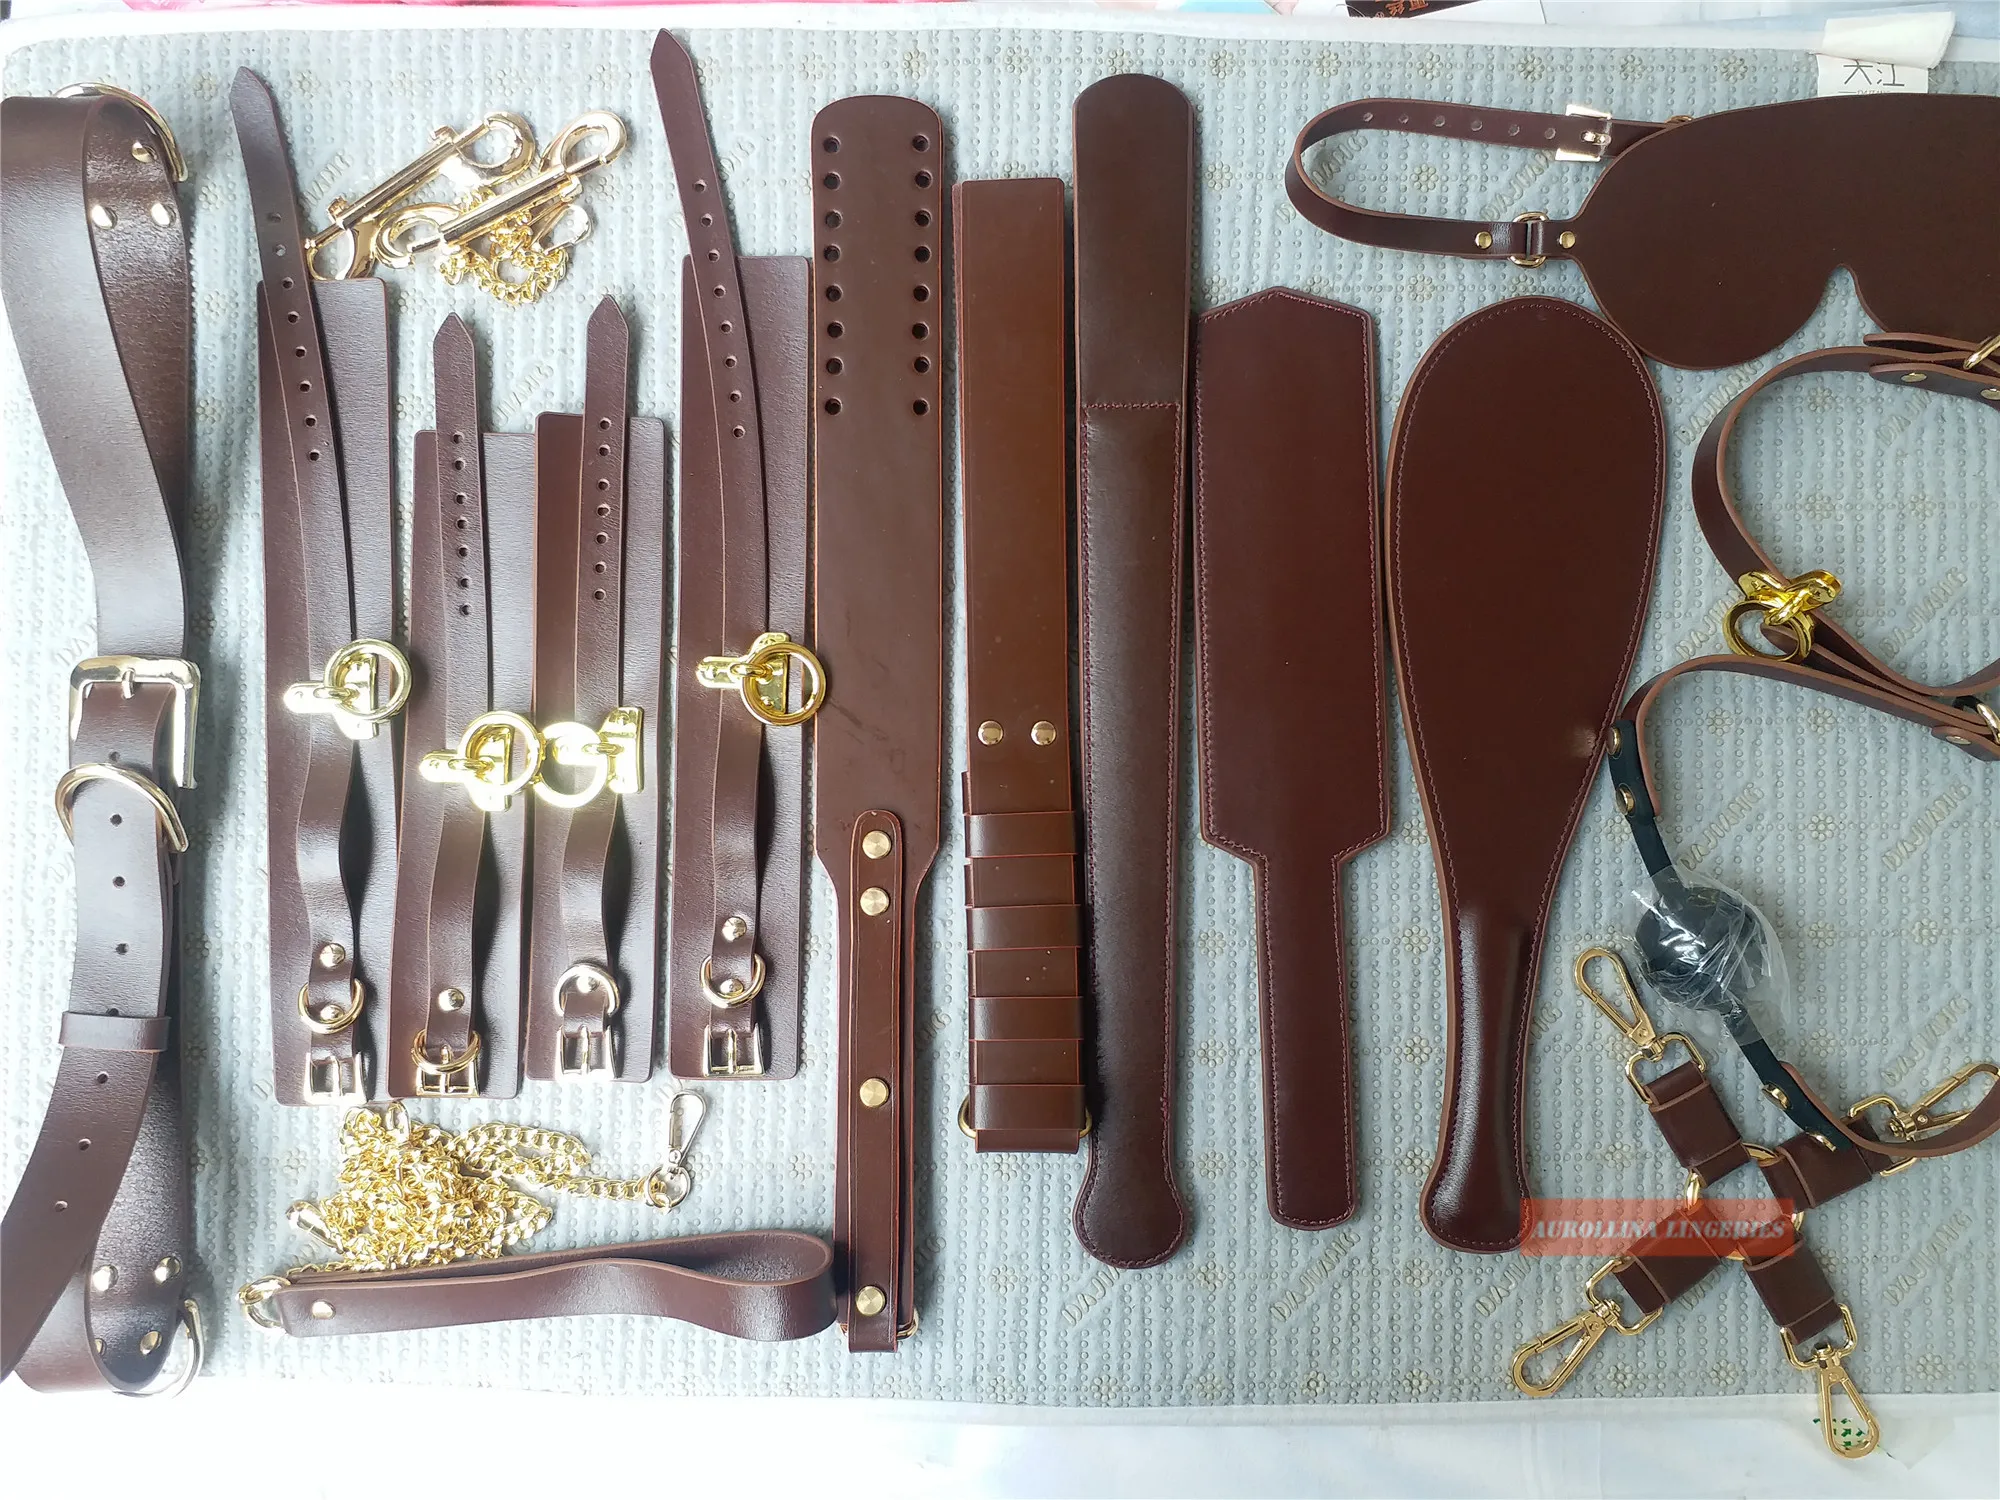 US $263.99 Custom Made BDSM Set Gears Brown Color Leather Gold Metal BDSM Belt D Ring Spanking Paddle Choker  Gag Cuffs Paddle Spoon Patch